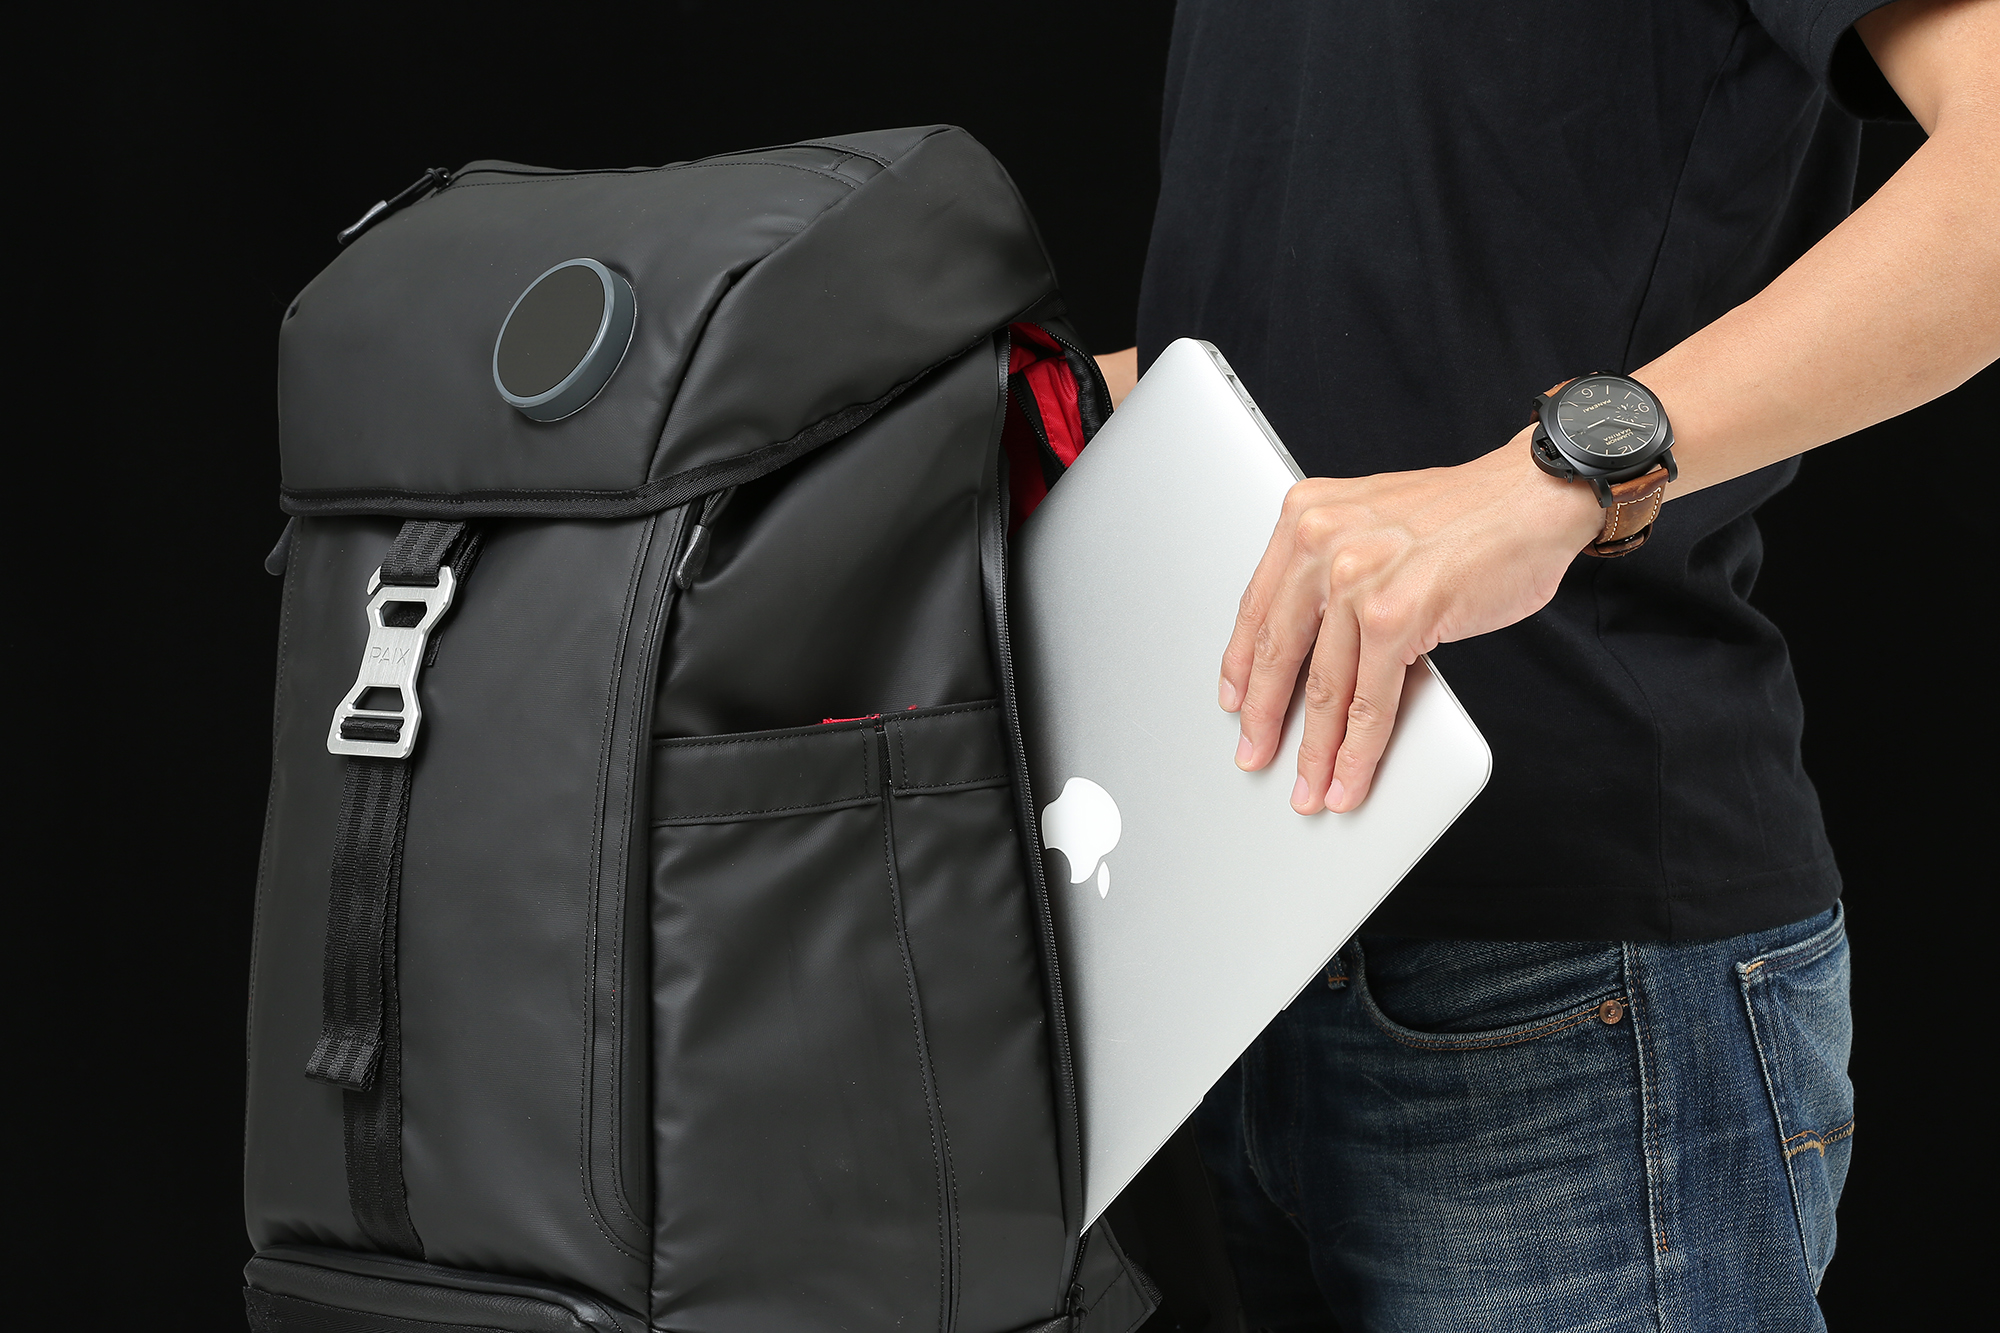 BackPAIX is equipped with 30 litres of cargo space and a side pocket that easily fits one 15” laptop and one 10” tablet.